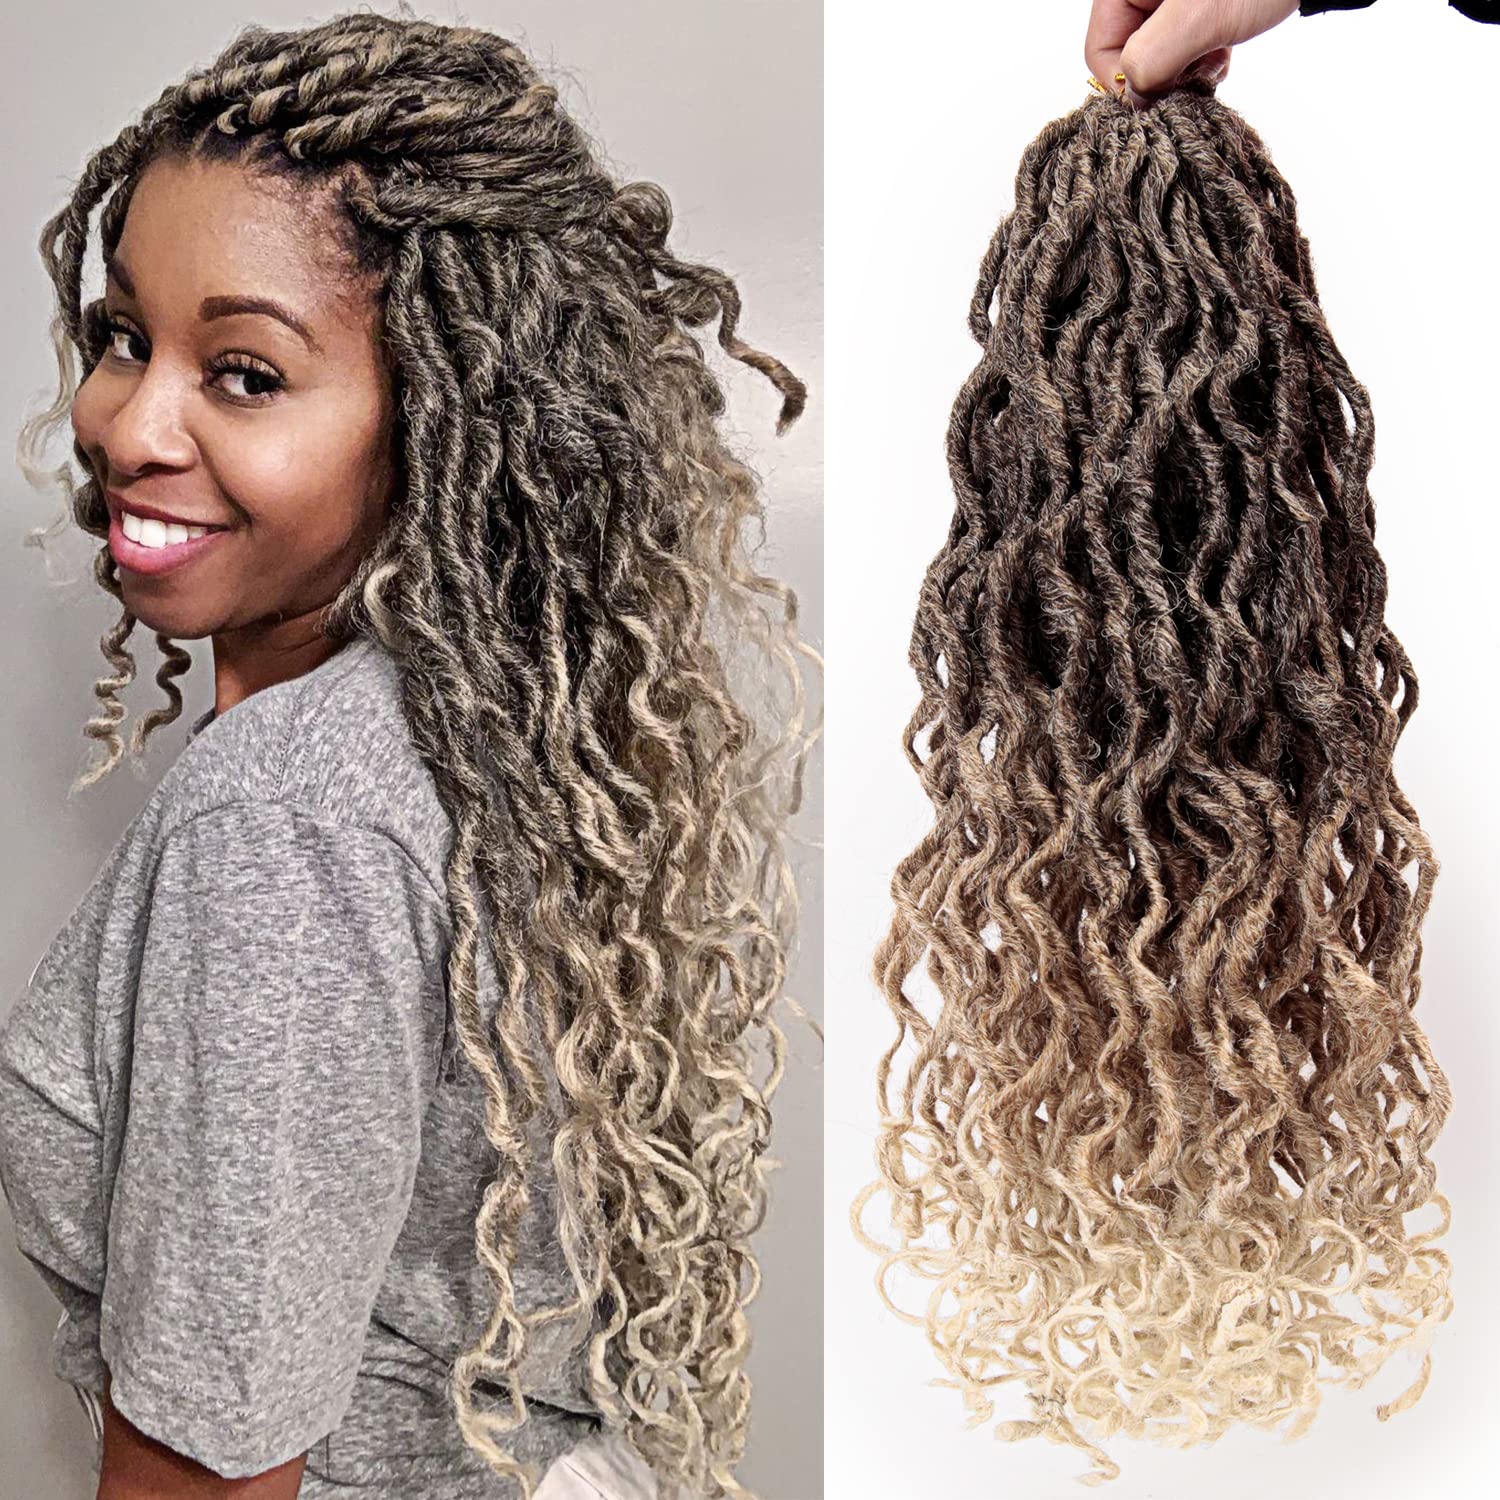 6 Packs Goddess Faux Locs Crochet Hair Beach Locs Crochet Braids Afro  Dreadlocks Ombre Synthetic Braids New Hairstyle (4/27/613, 18) 4/27/613 18  Inch (Pack of 6)